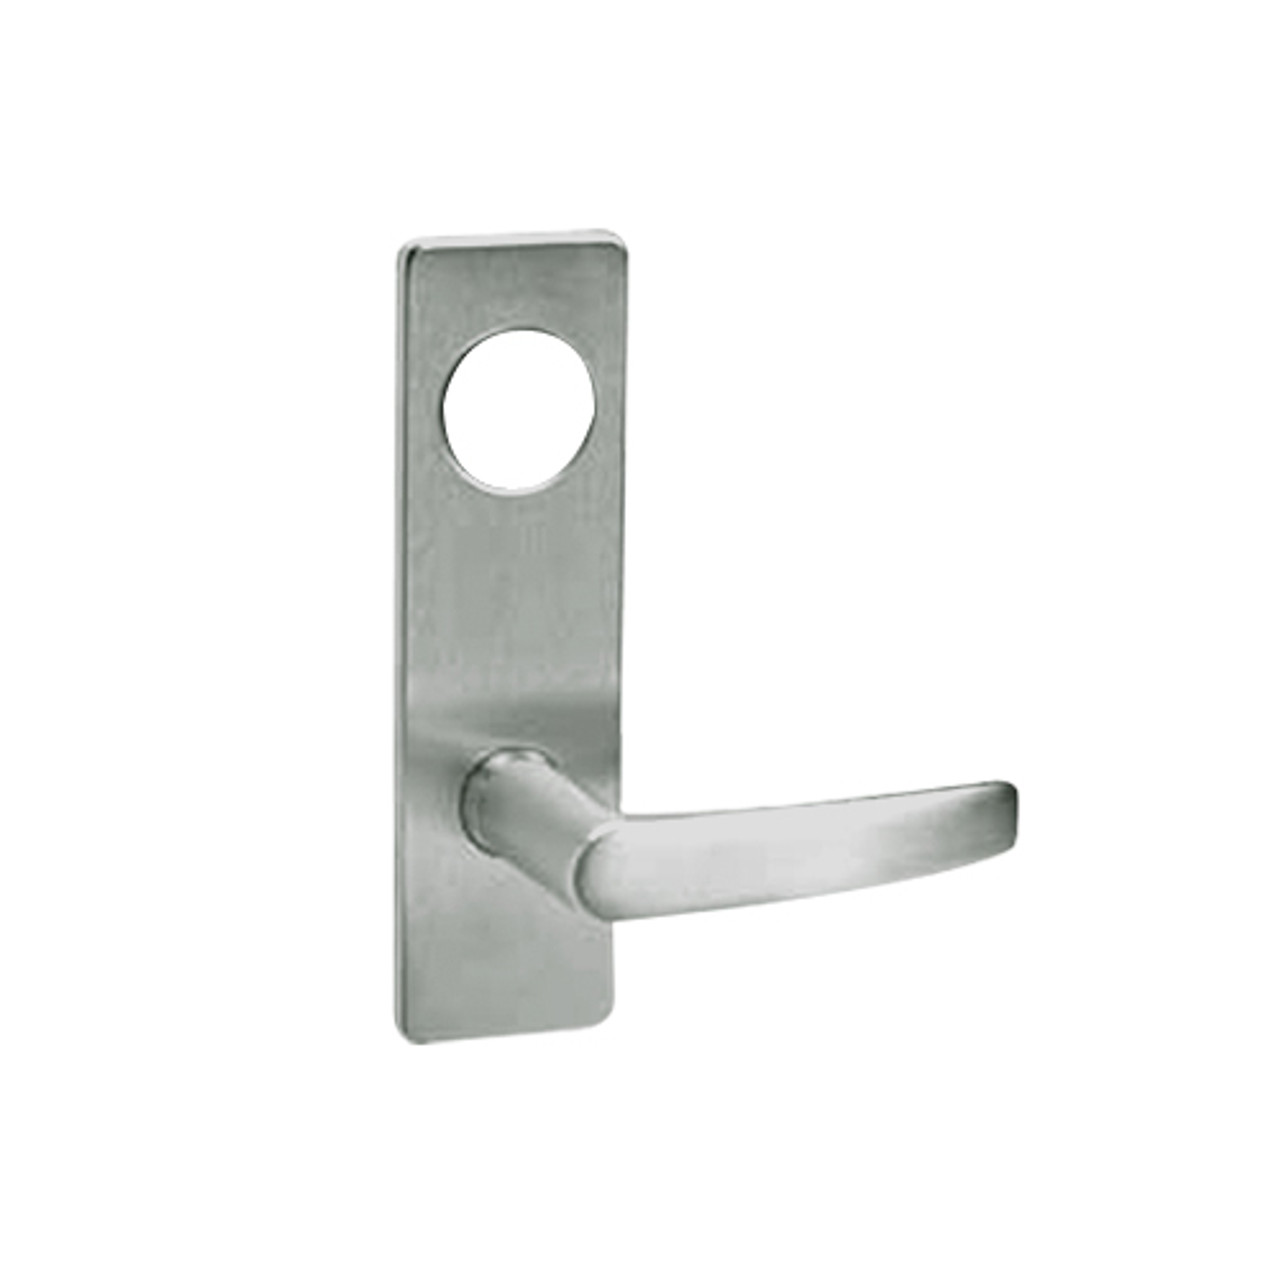 ML2058-ASM-619-LC Corbin Russwin ML2000 Series Mortise Entrance Holdback Locksets with Armstrong Lever in Satin Nickel